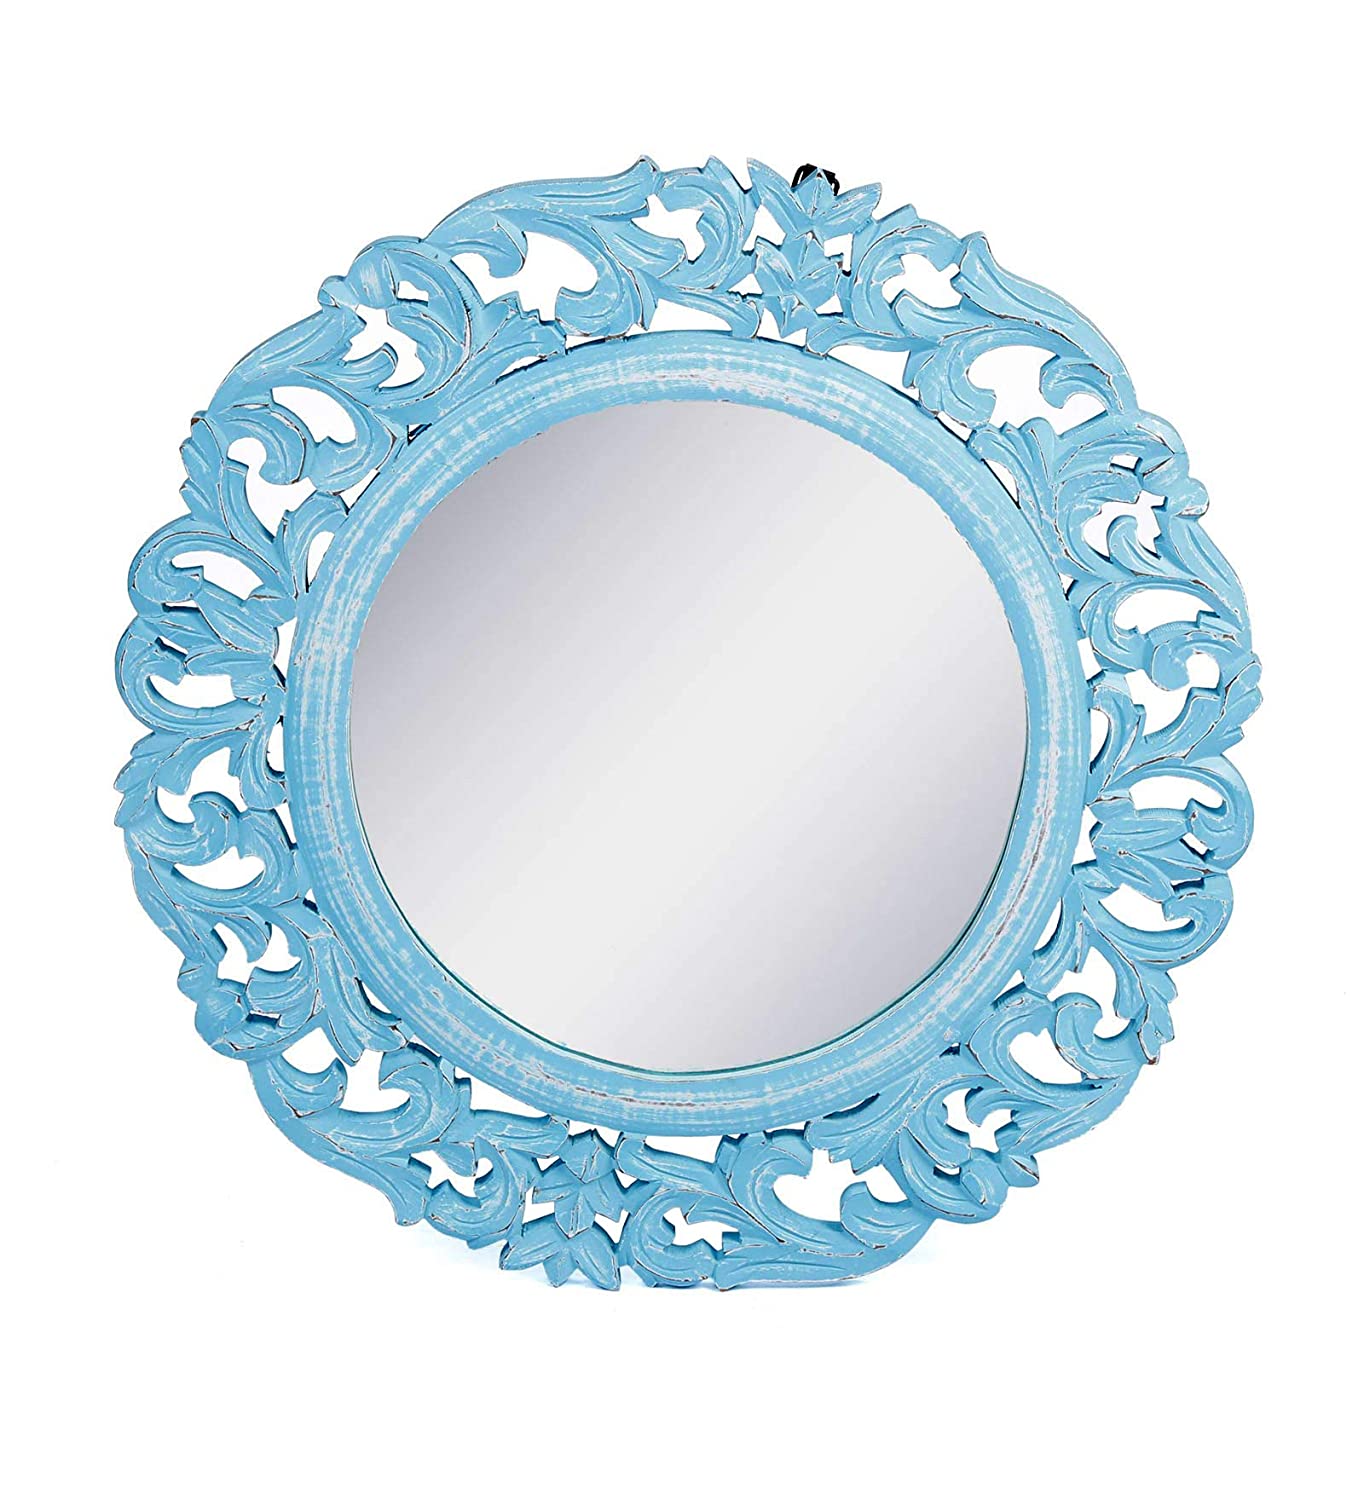 Wood Hand Crafted Round Shape Vanity Wall Mirror Glass for Living Room, 20"X 20" Blue, Framed